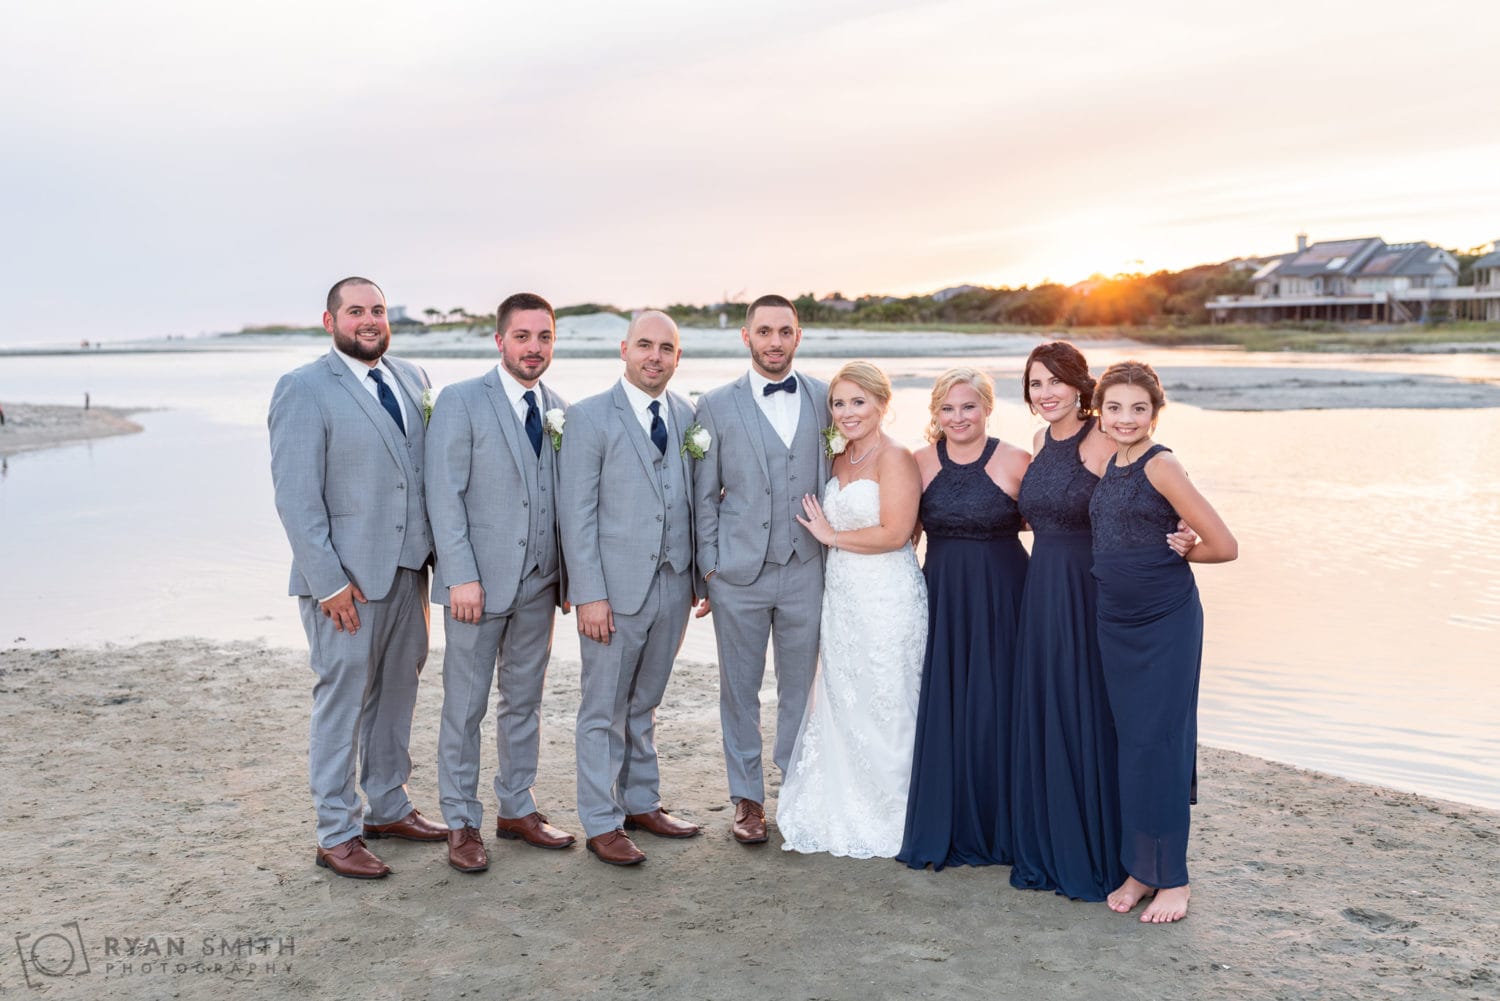 Bridal party in a pretty sunset - 21 Main Events - North Myrtle Beach